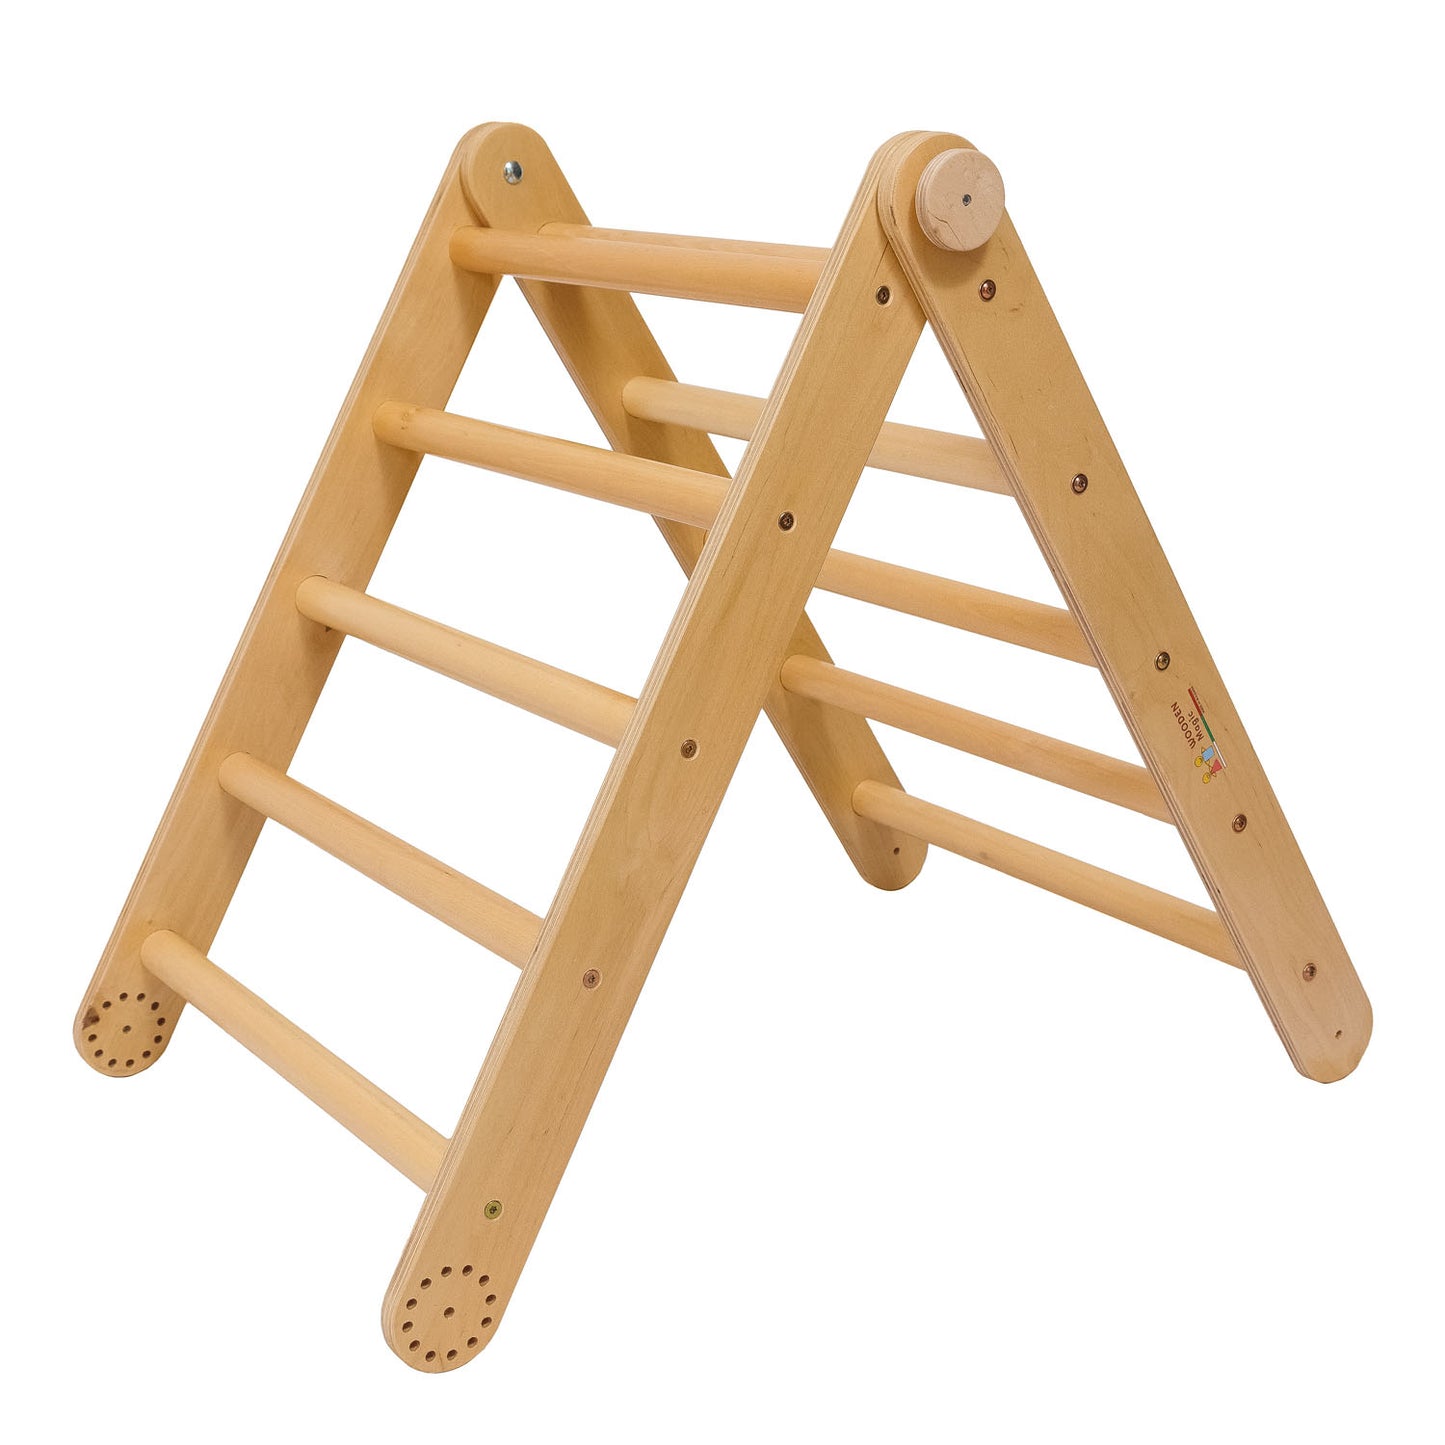 Modifiable Climbing Triangle Set 4 modules + 2x Double-Sided Ramp + Arch